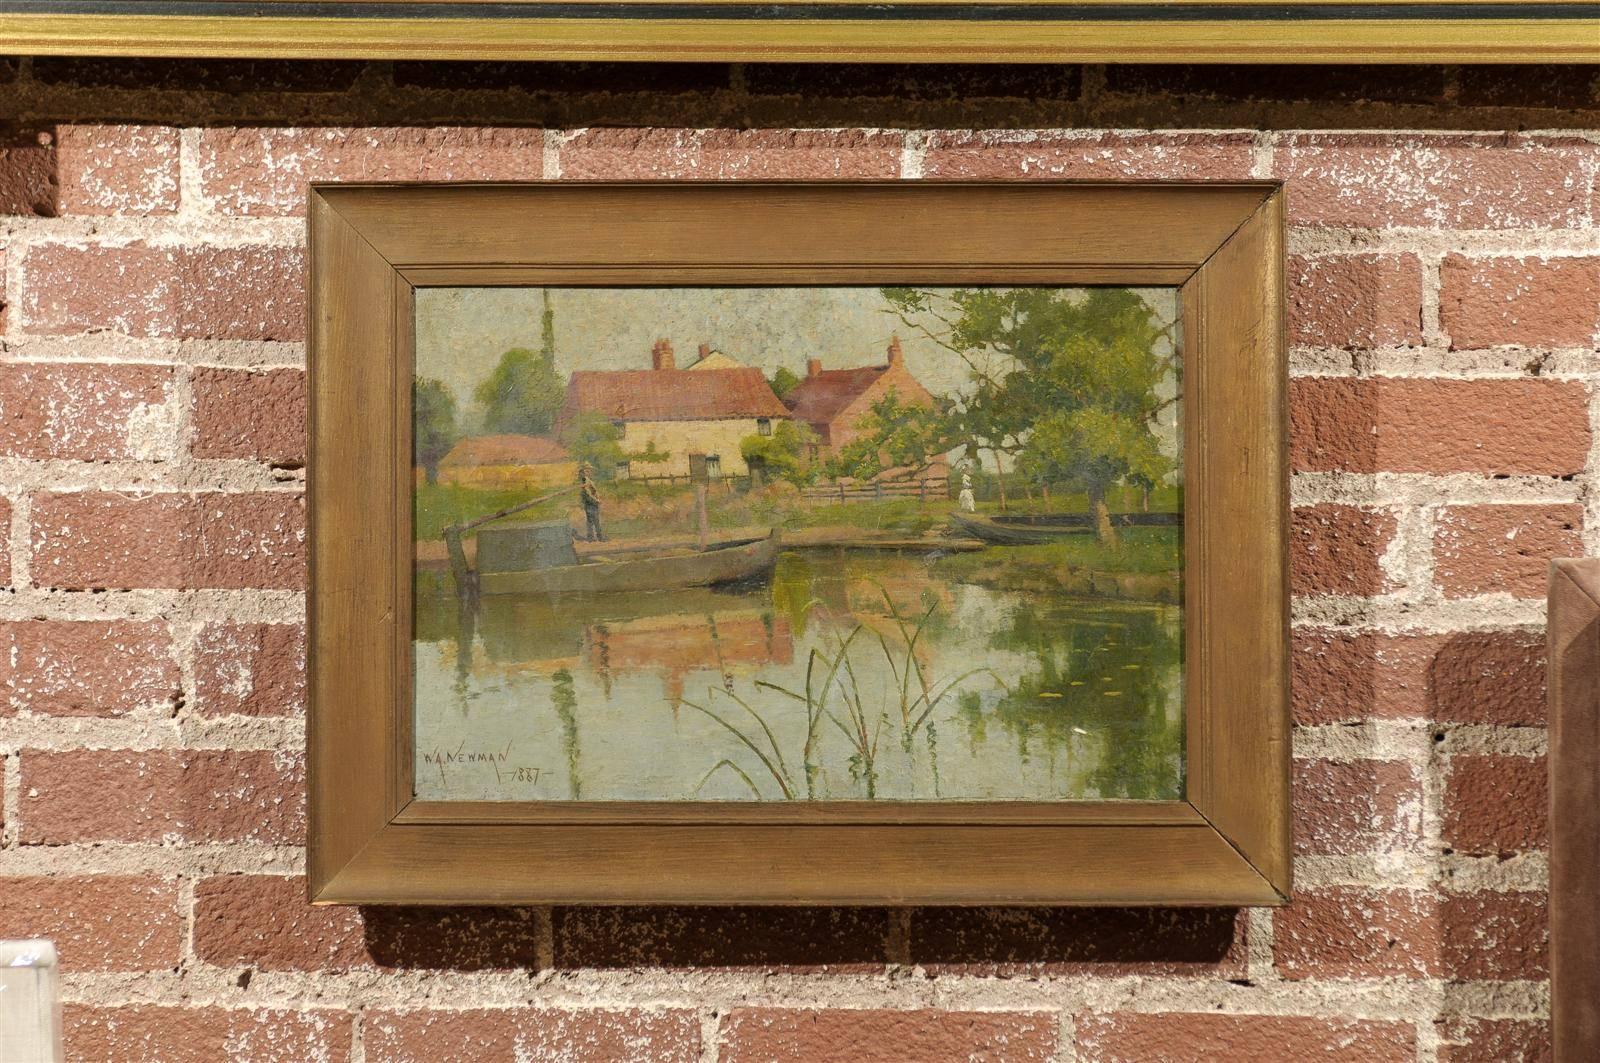 Charming 19th century early impressionist English landscape of boats docked in a pond in the foreground with a gentleman standing along the bank, and Provençal buildings and a Victorian lady walking in the background.  Oil on canvas in a gilded